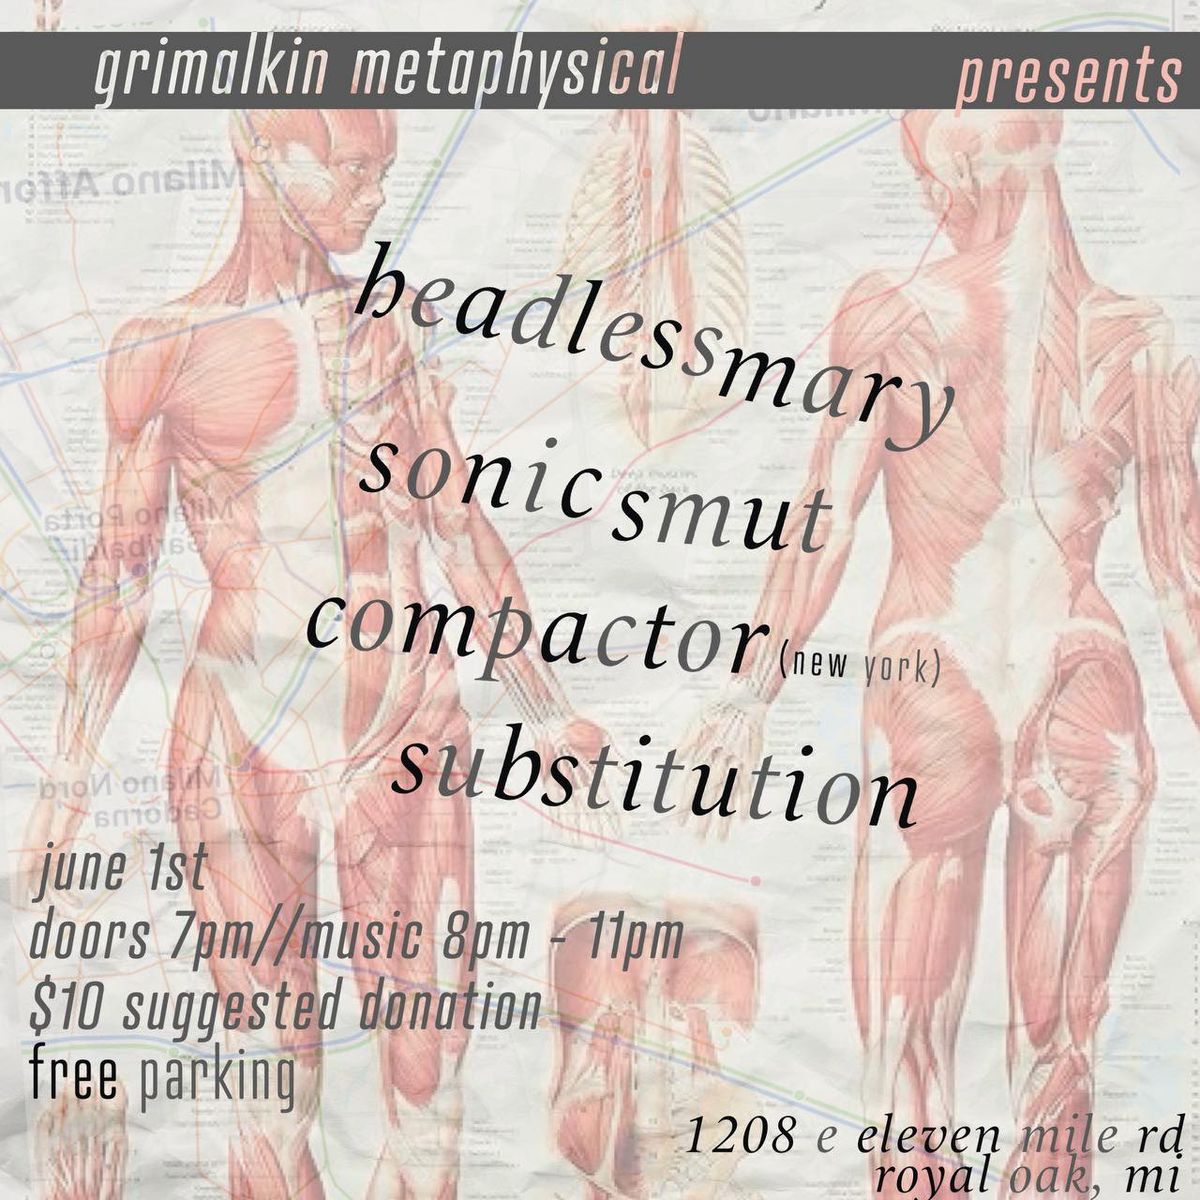 Headless Mary, COMPACTOR (New York), Sonic Smut, Substitution at Grimalkin Metaphysical